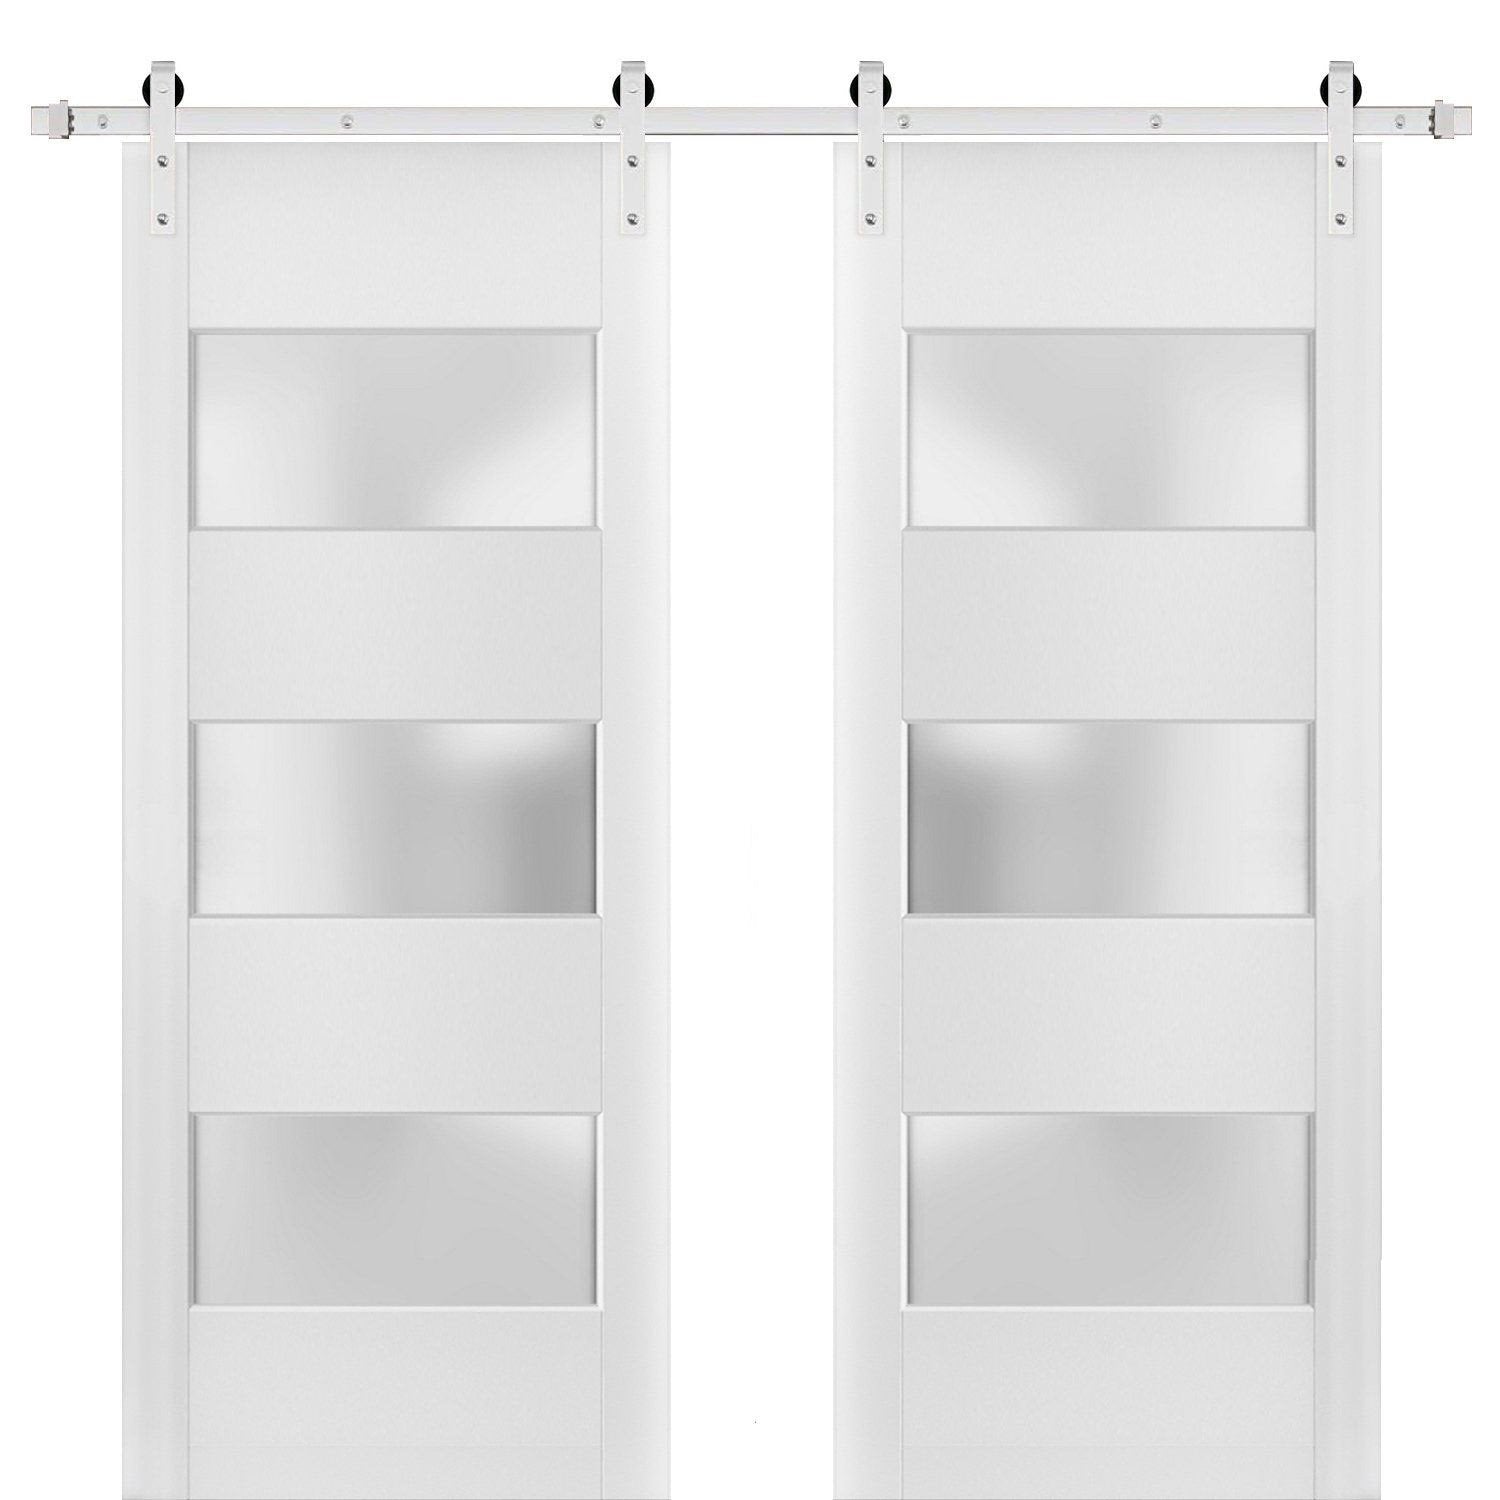 Lucia 4070 White Silk Double Barn Door with 3 Lites Frosted Glass | Stainless Steel Rail